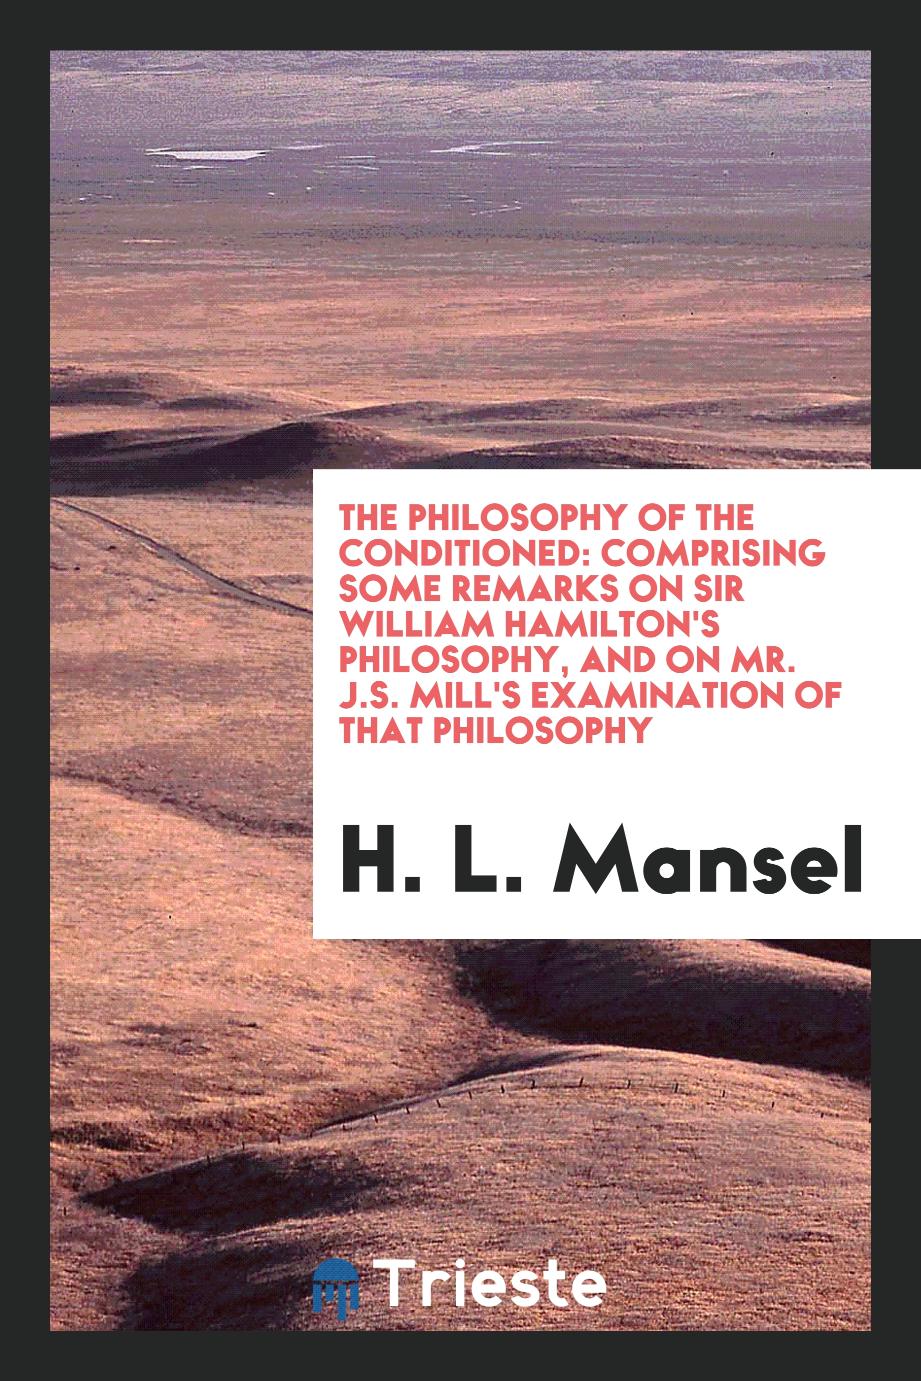 The philosophy of the conditioned: comprising some remarks on Sir William Hamilton's philosophy, and on Mr. J.S. Mill's examination of that philosophy